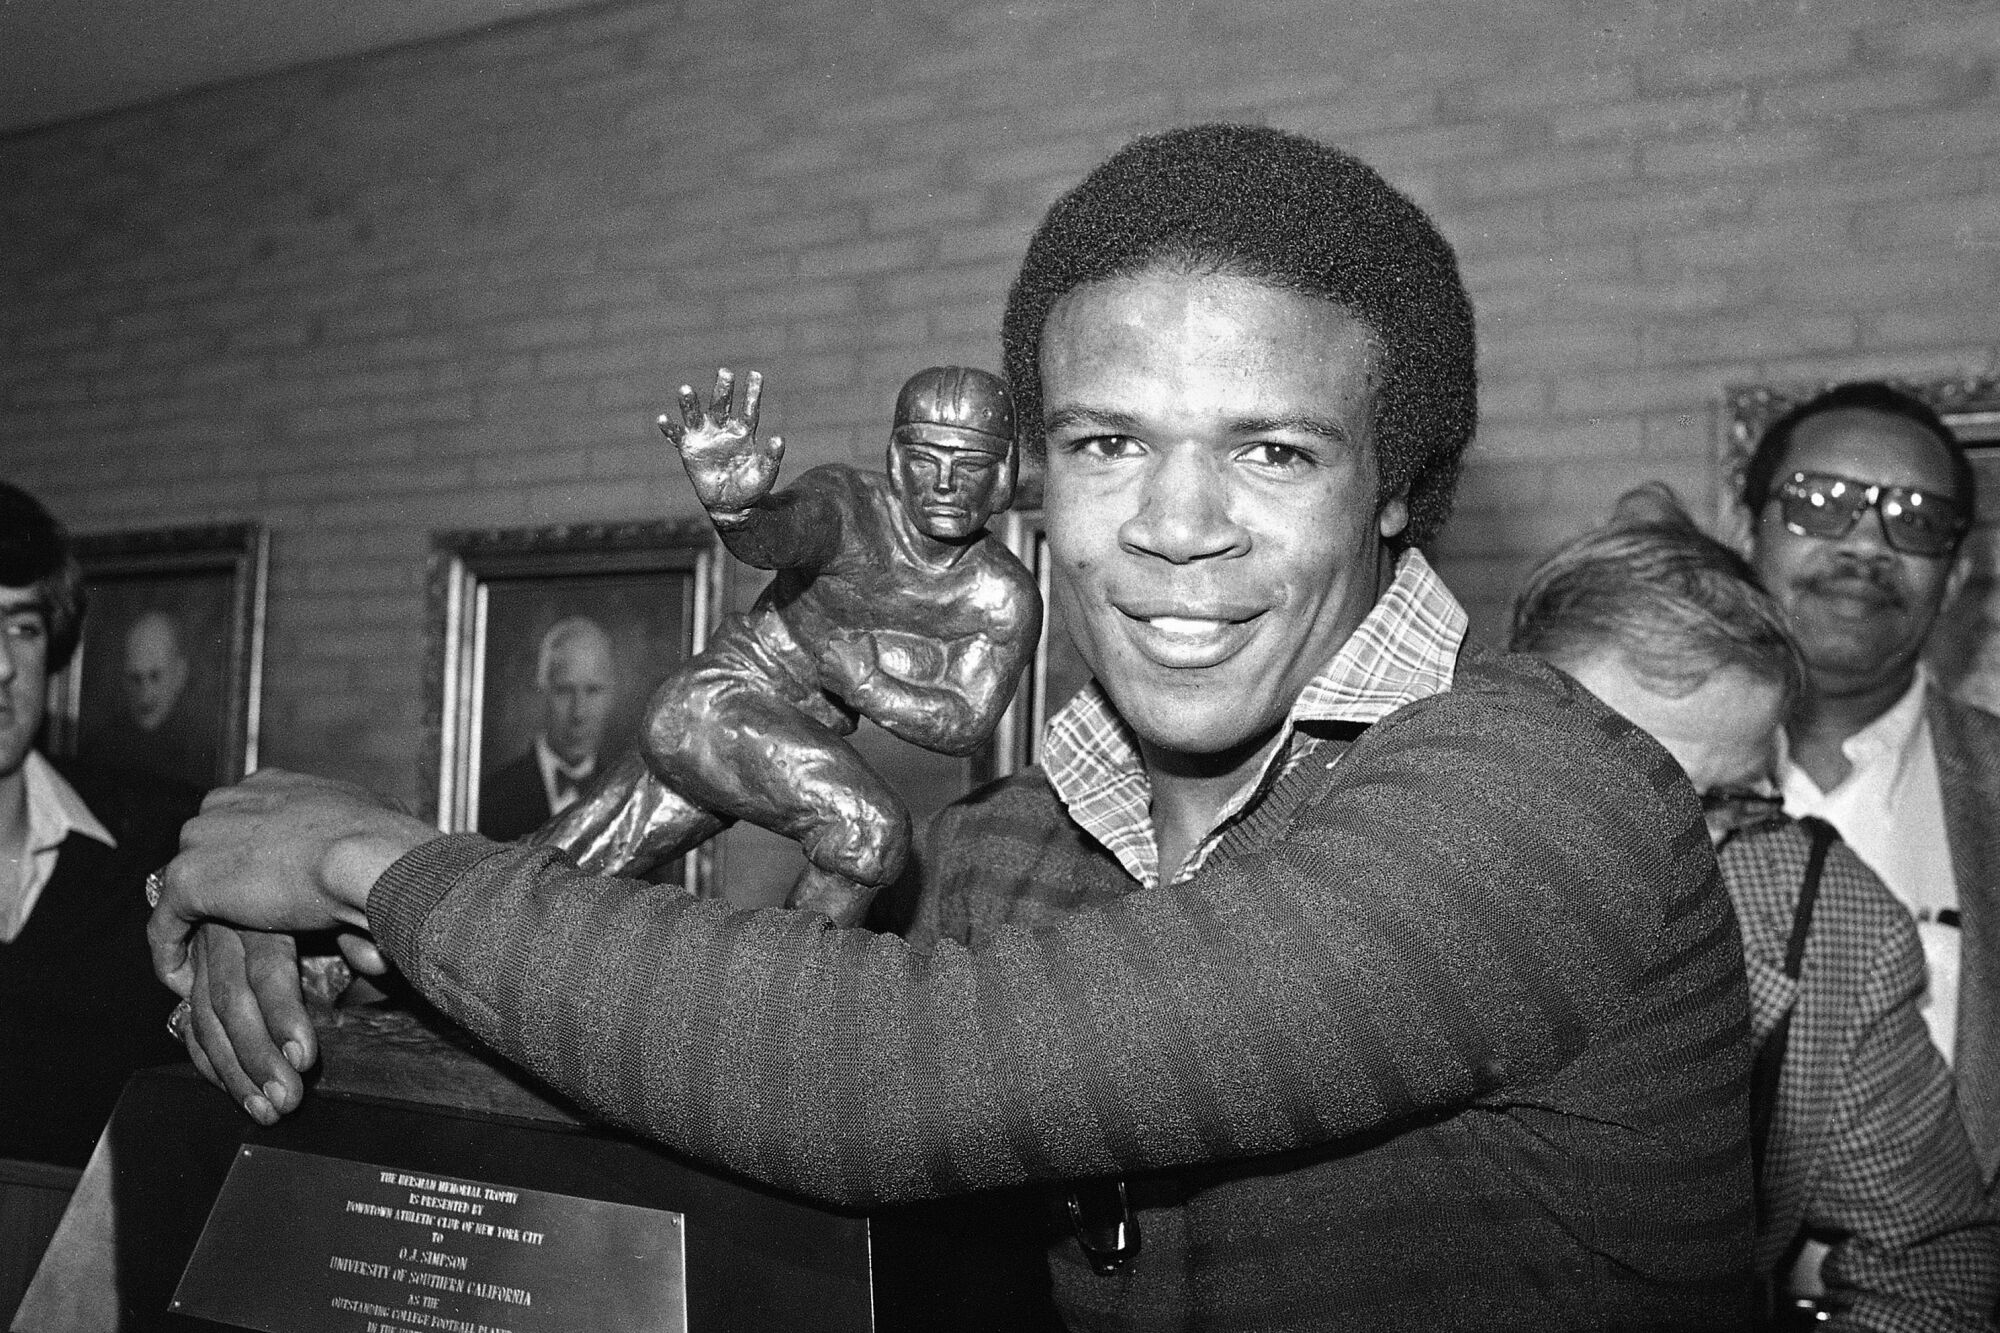 USC tailback Charles White puts his arms around the Heisman Trophy won by O.J. Simpson in 1968.